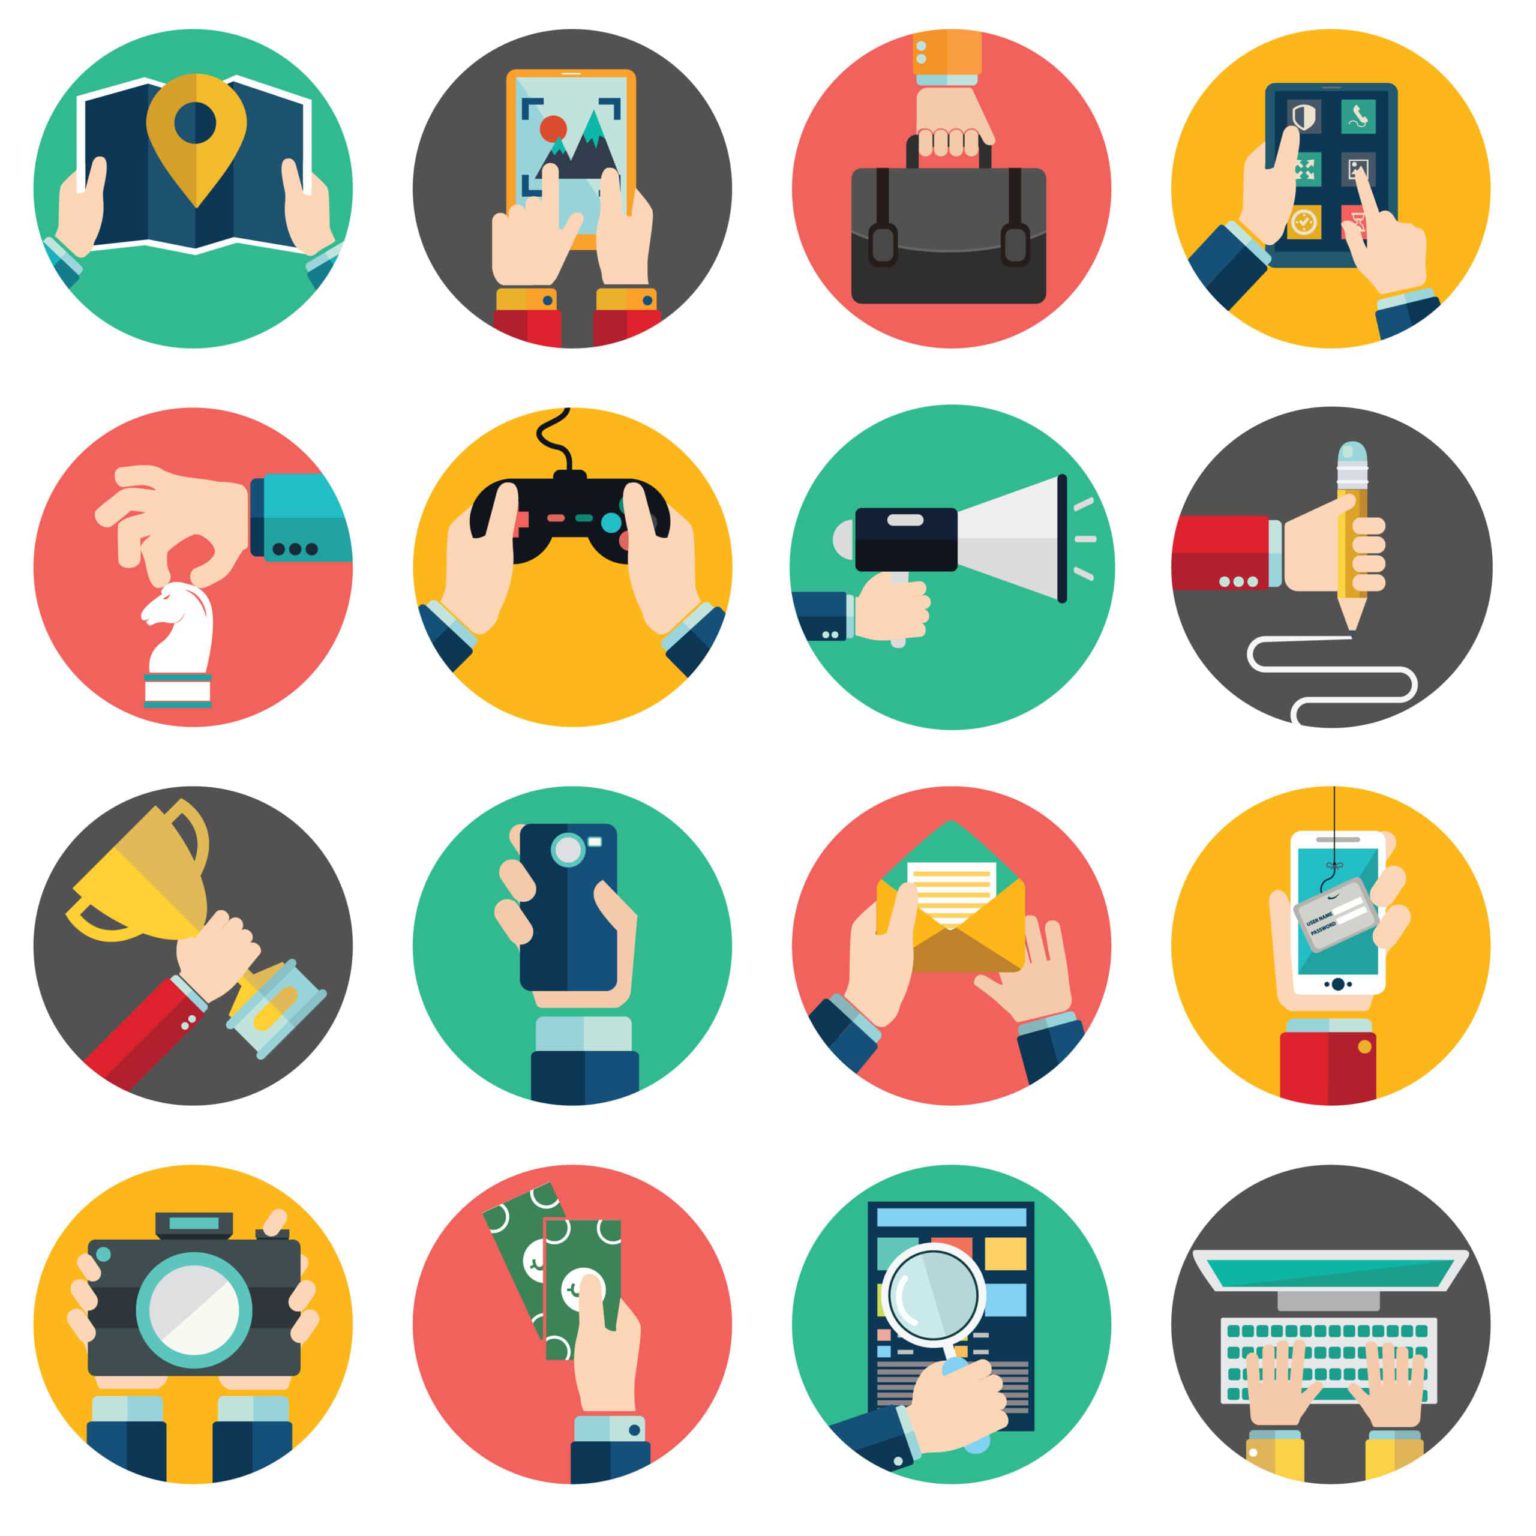 How Gamification Can Increase Engagement